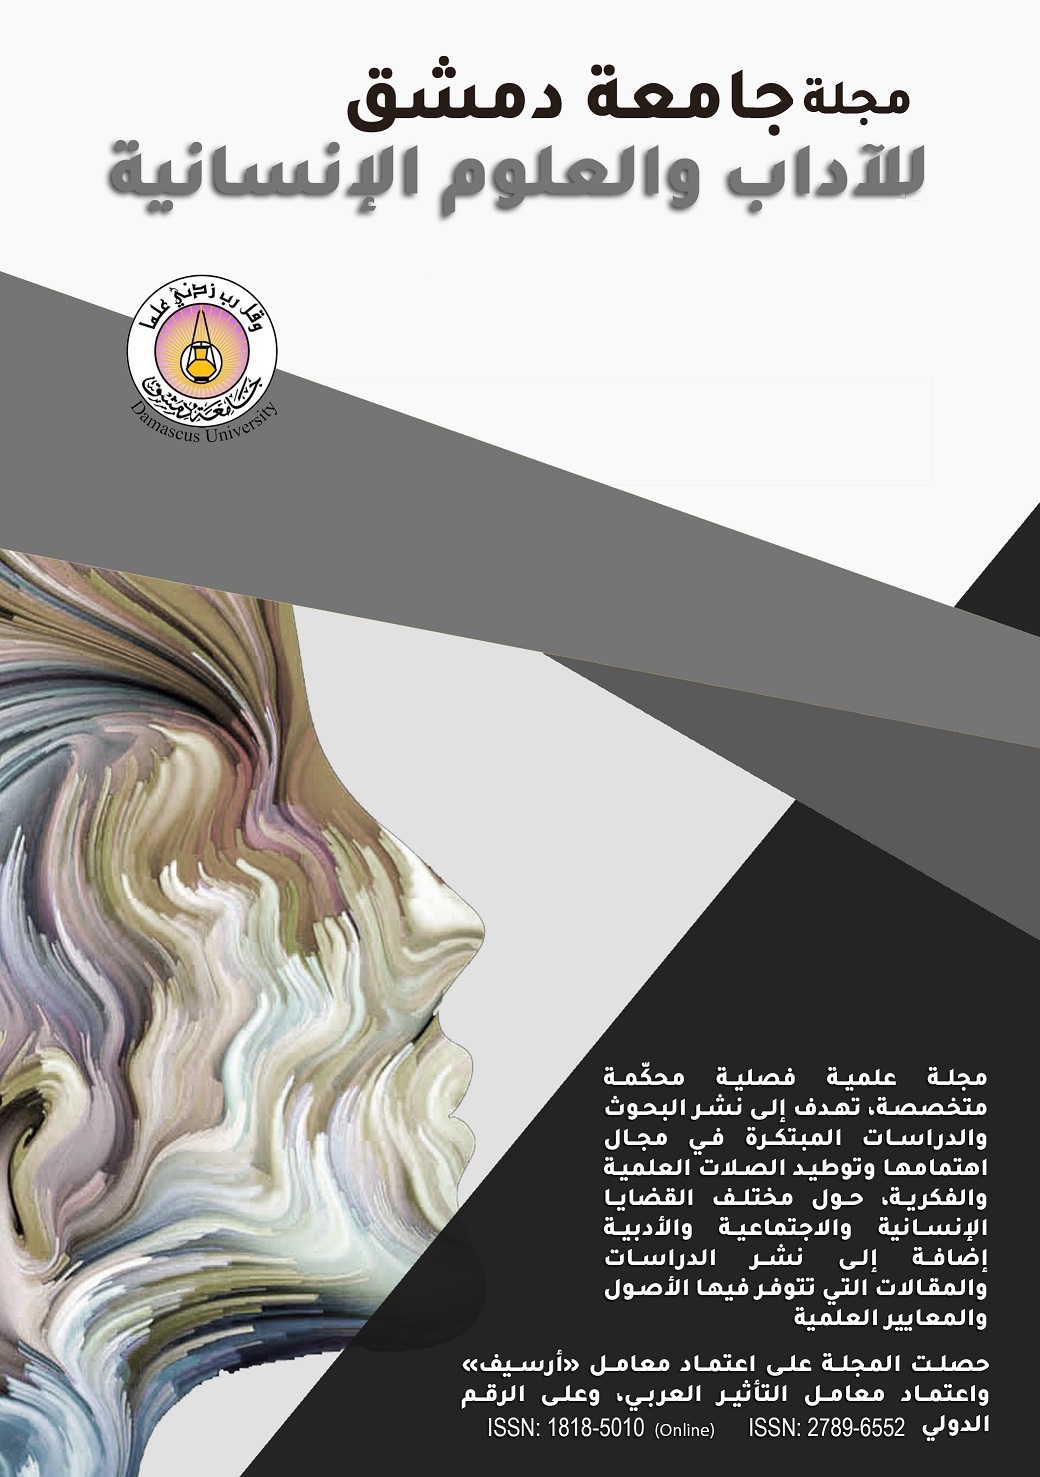 					View Vol. 35 No. 2 (2019):  Damascus University Journal of Arts And Humanities
				